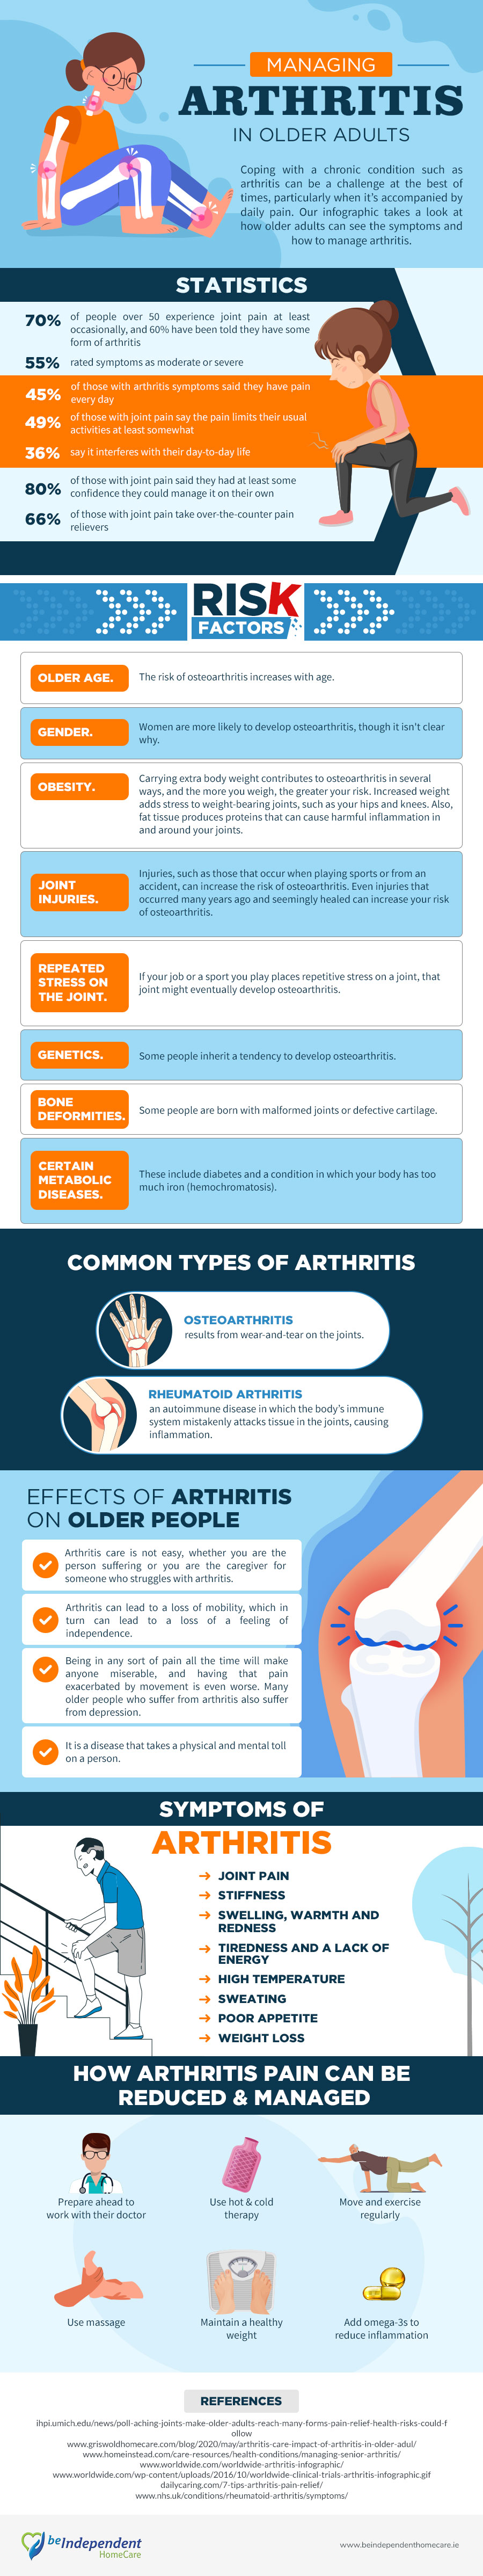 infographic on managing arthritis among seniors and older people